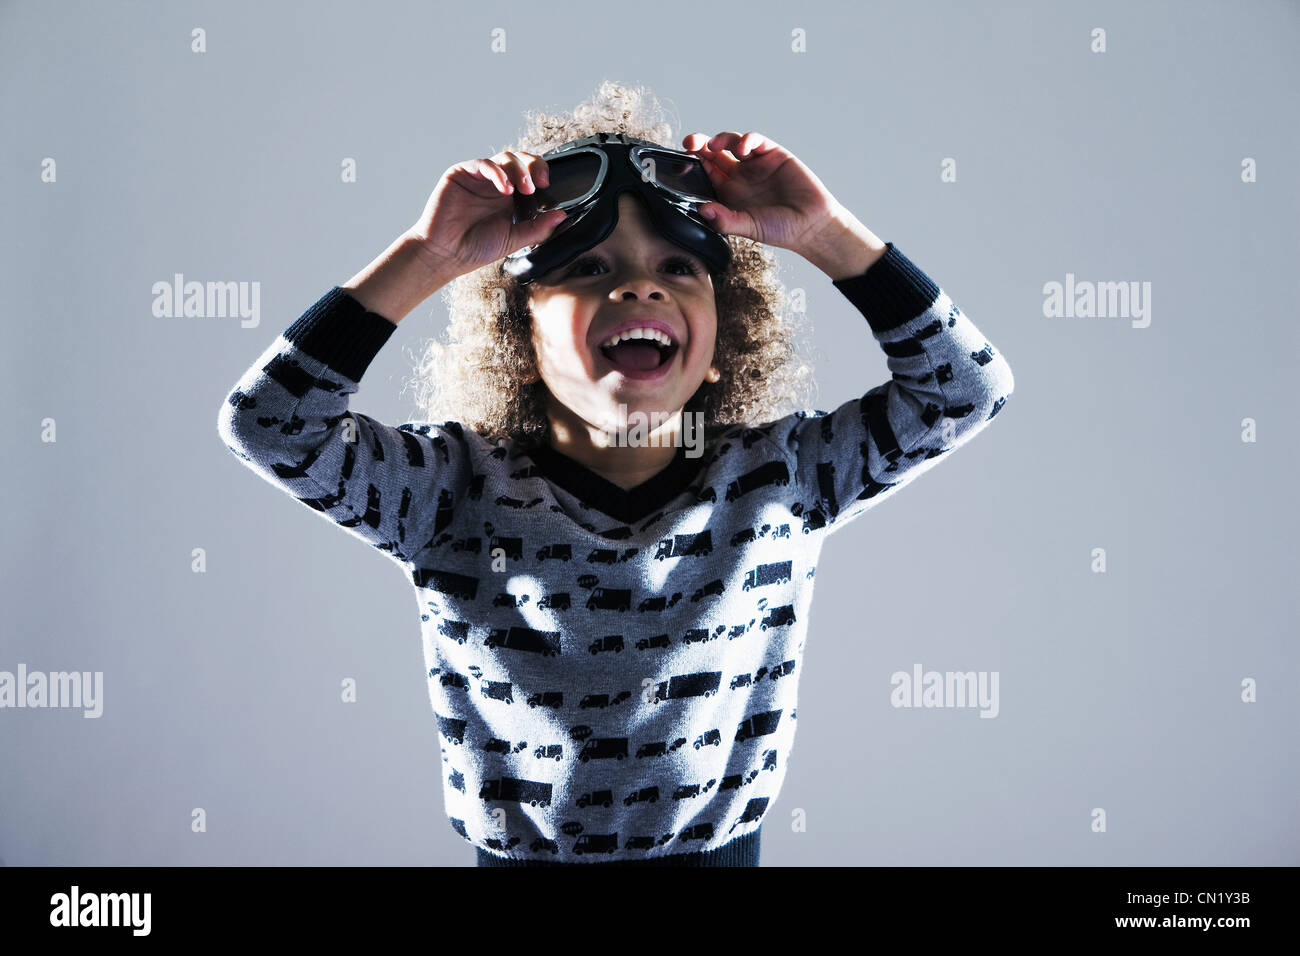 Young boy with flying goggles on head Stock Photo